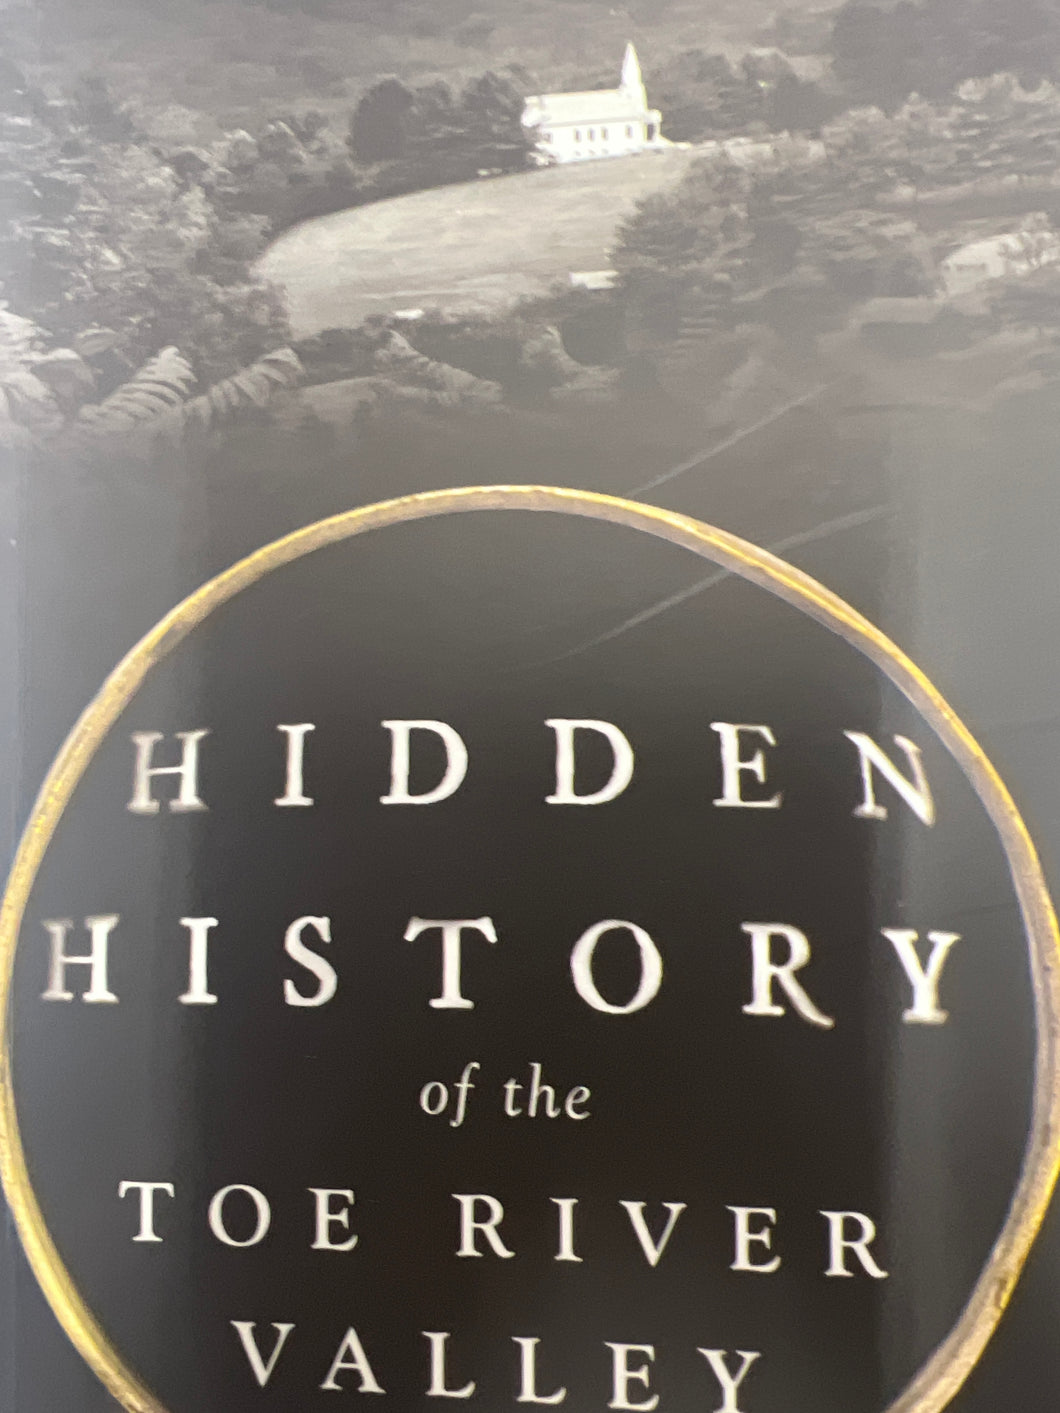 Hidden History of the Toe River Valley